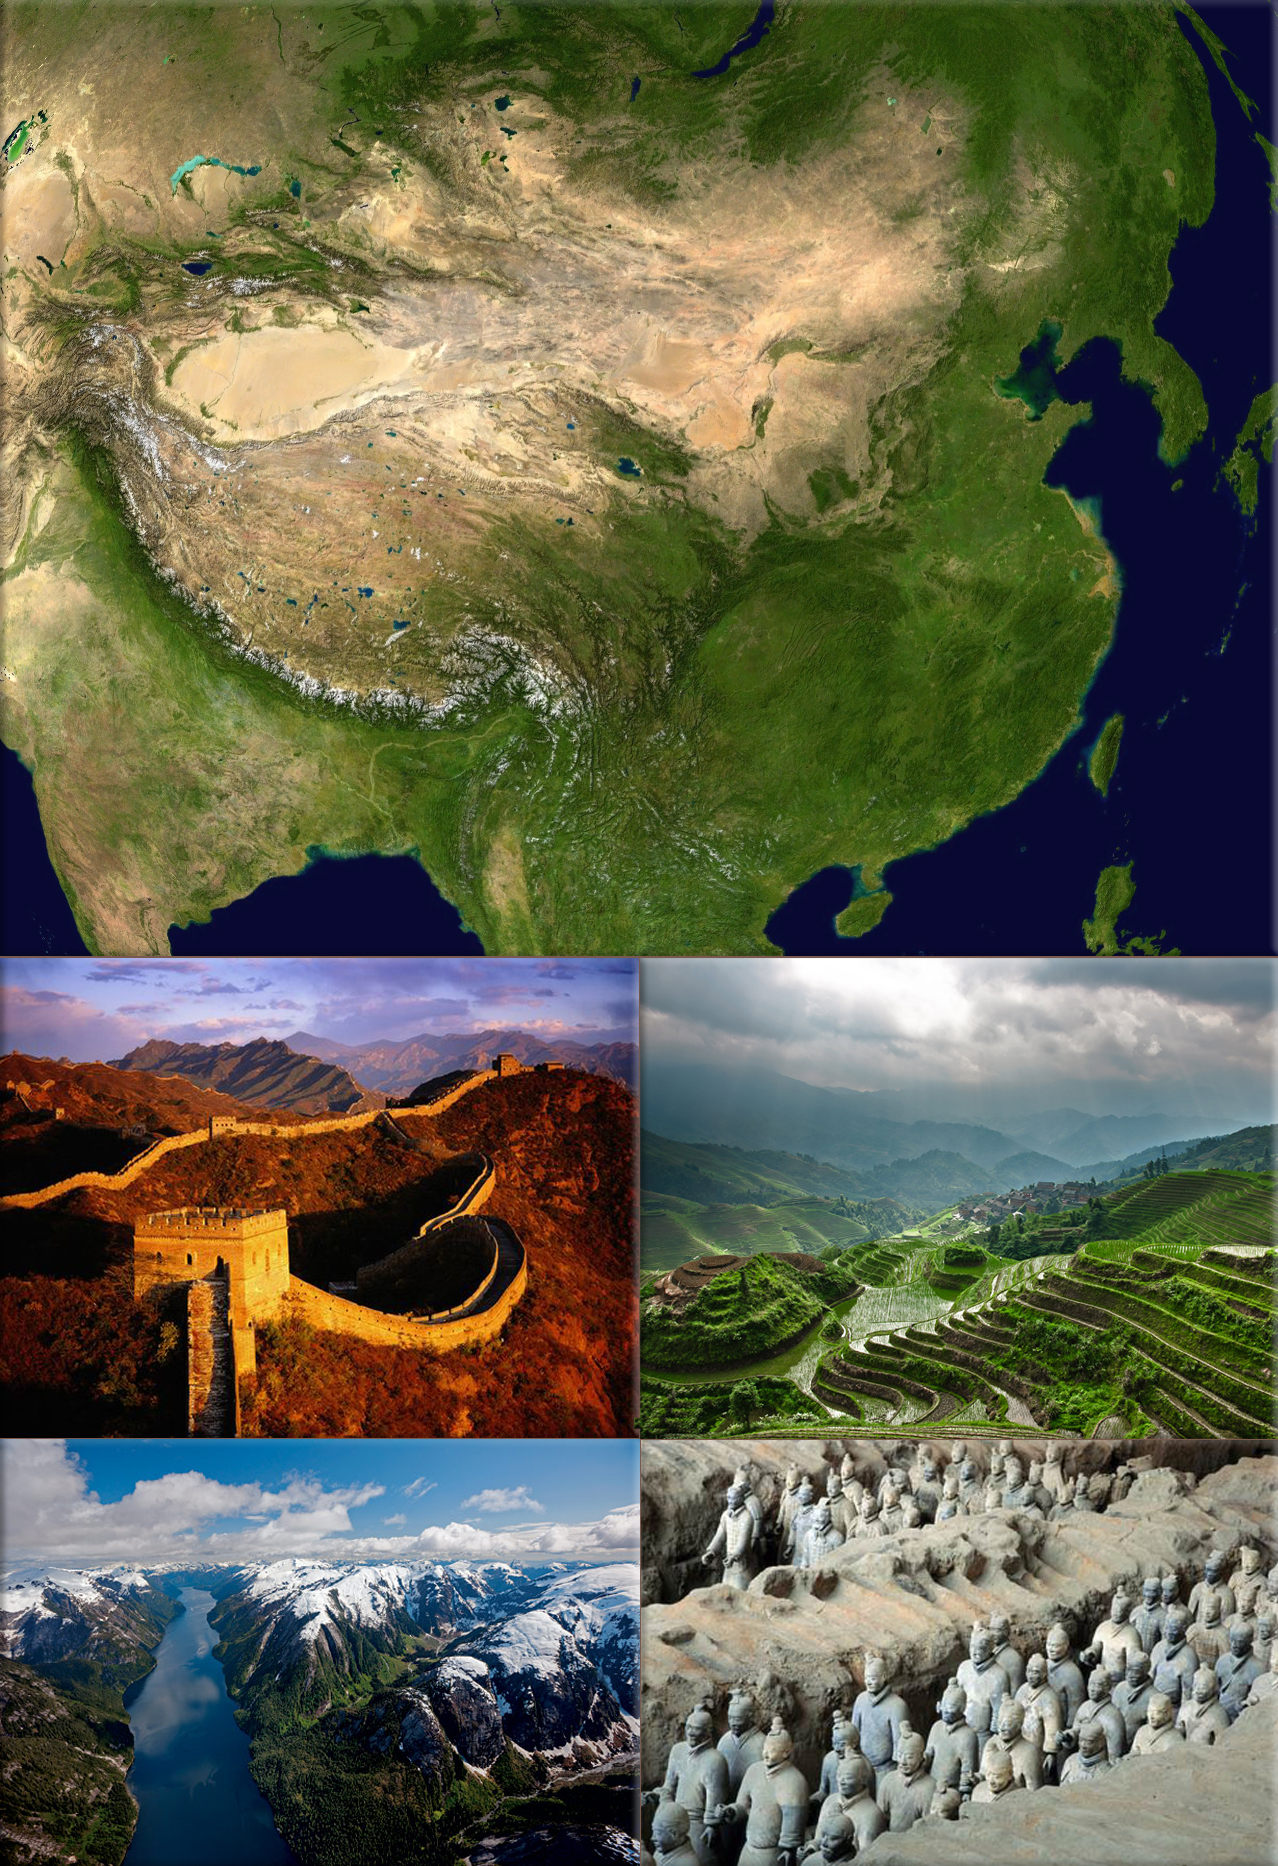 China: the world's most populous country, covering approximately 9.6 million square kilometres, second-largest country by land area (China from NASA Wordwind Satellite; Great Wall of China, credit National Geographic; LongJi Terrace, credit National Geographic; Great Bear Rainforest, credit Paul Nicklen, National Geographic; Platoons of clay soldiers were buried with China's first emperor, Qin Shi Huang Di, (required a labor force of 700,000 to build), credit O. Louis Mazzatenta, National Geographic)